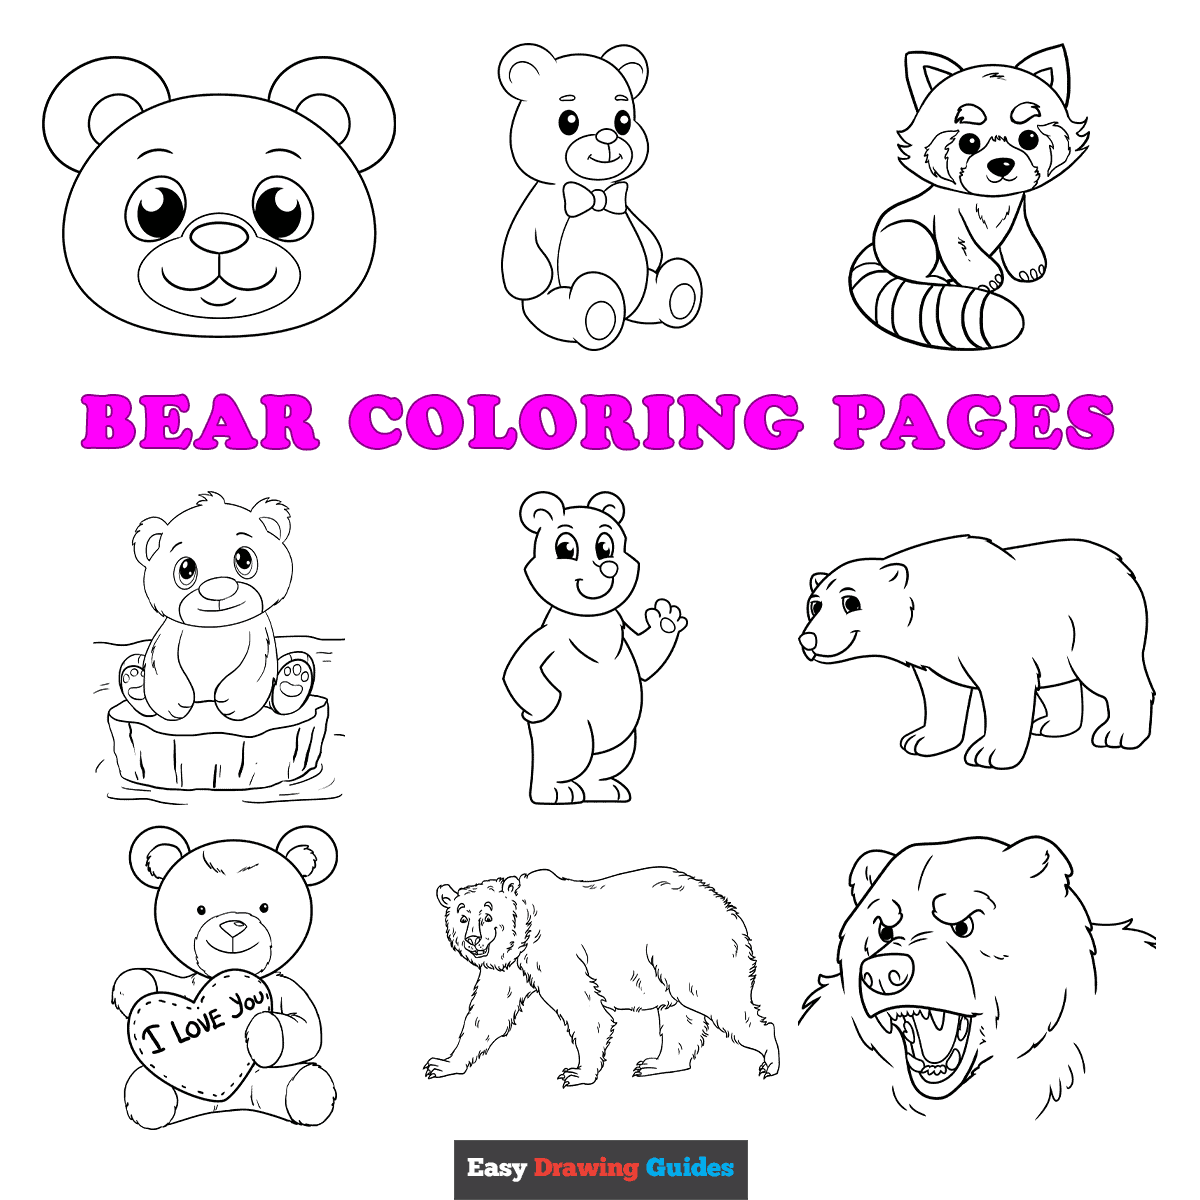 Free printable bear coloring pages for kids